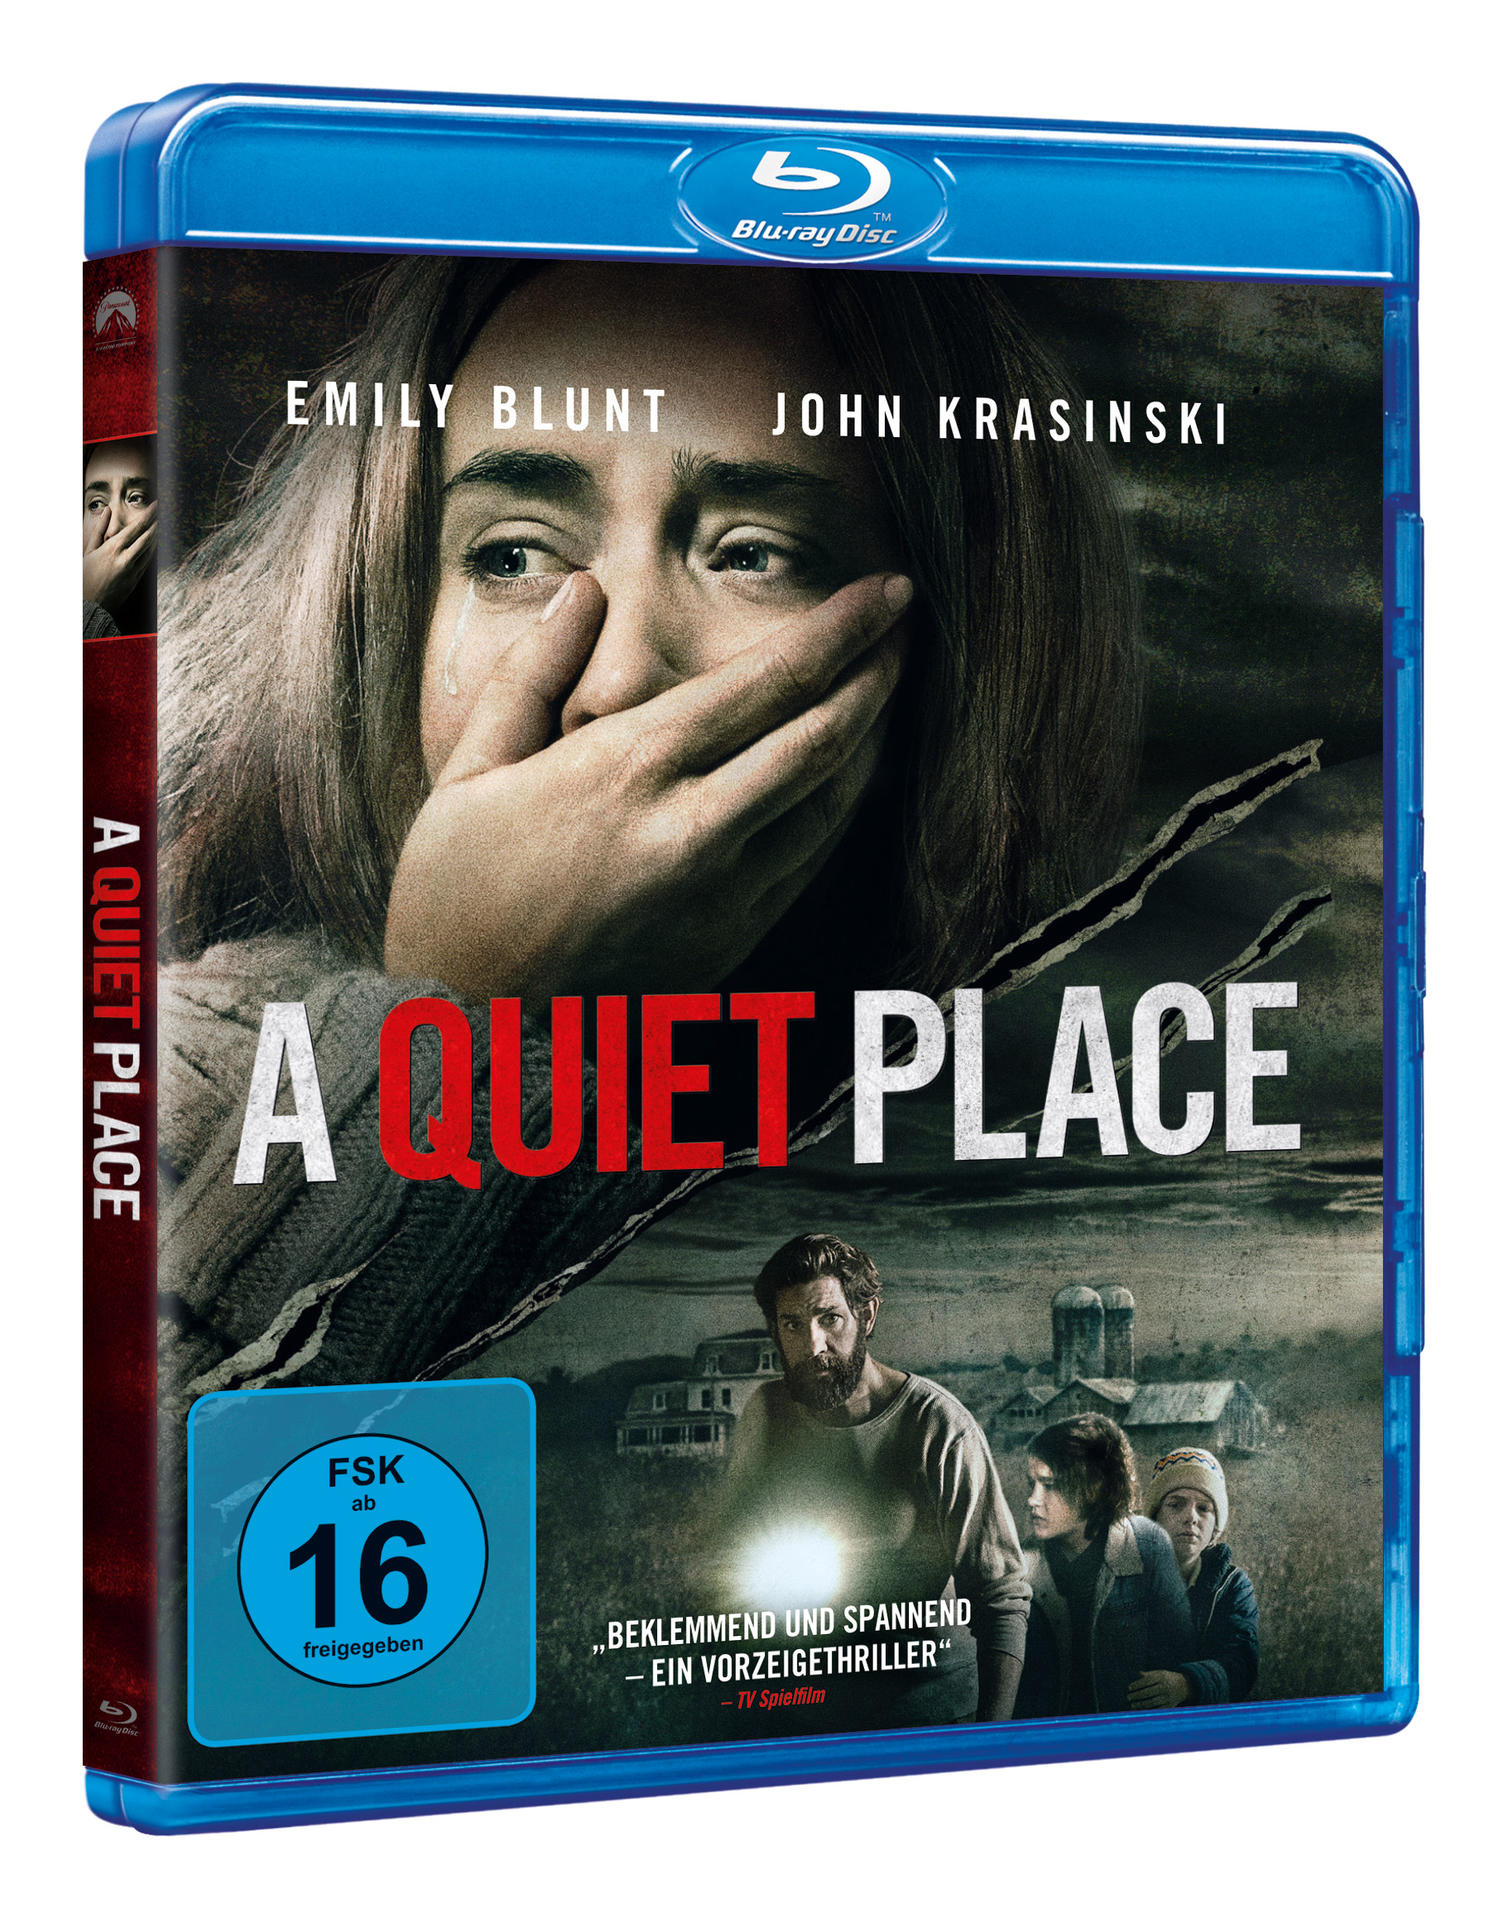 A Quiet Blu-ray Place